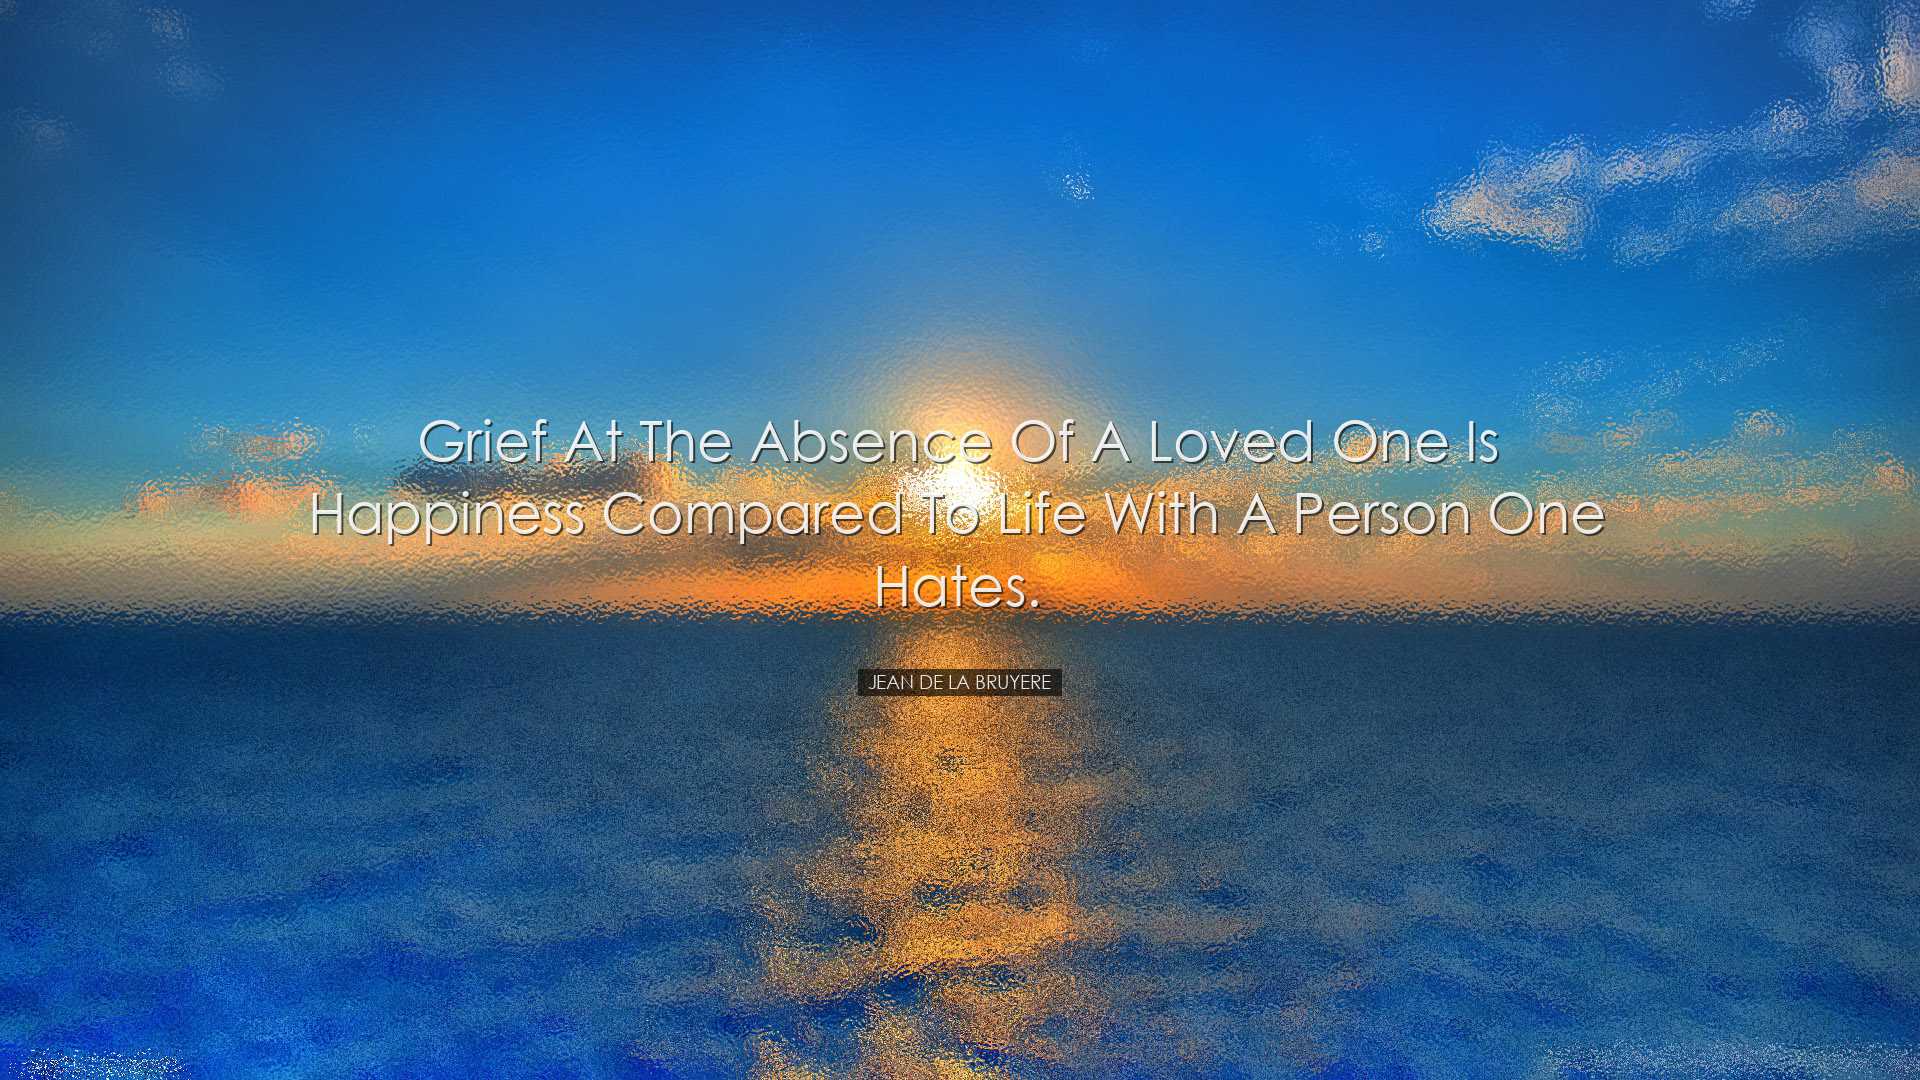 Grief at the absence of a loved one is happiness compared to life